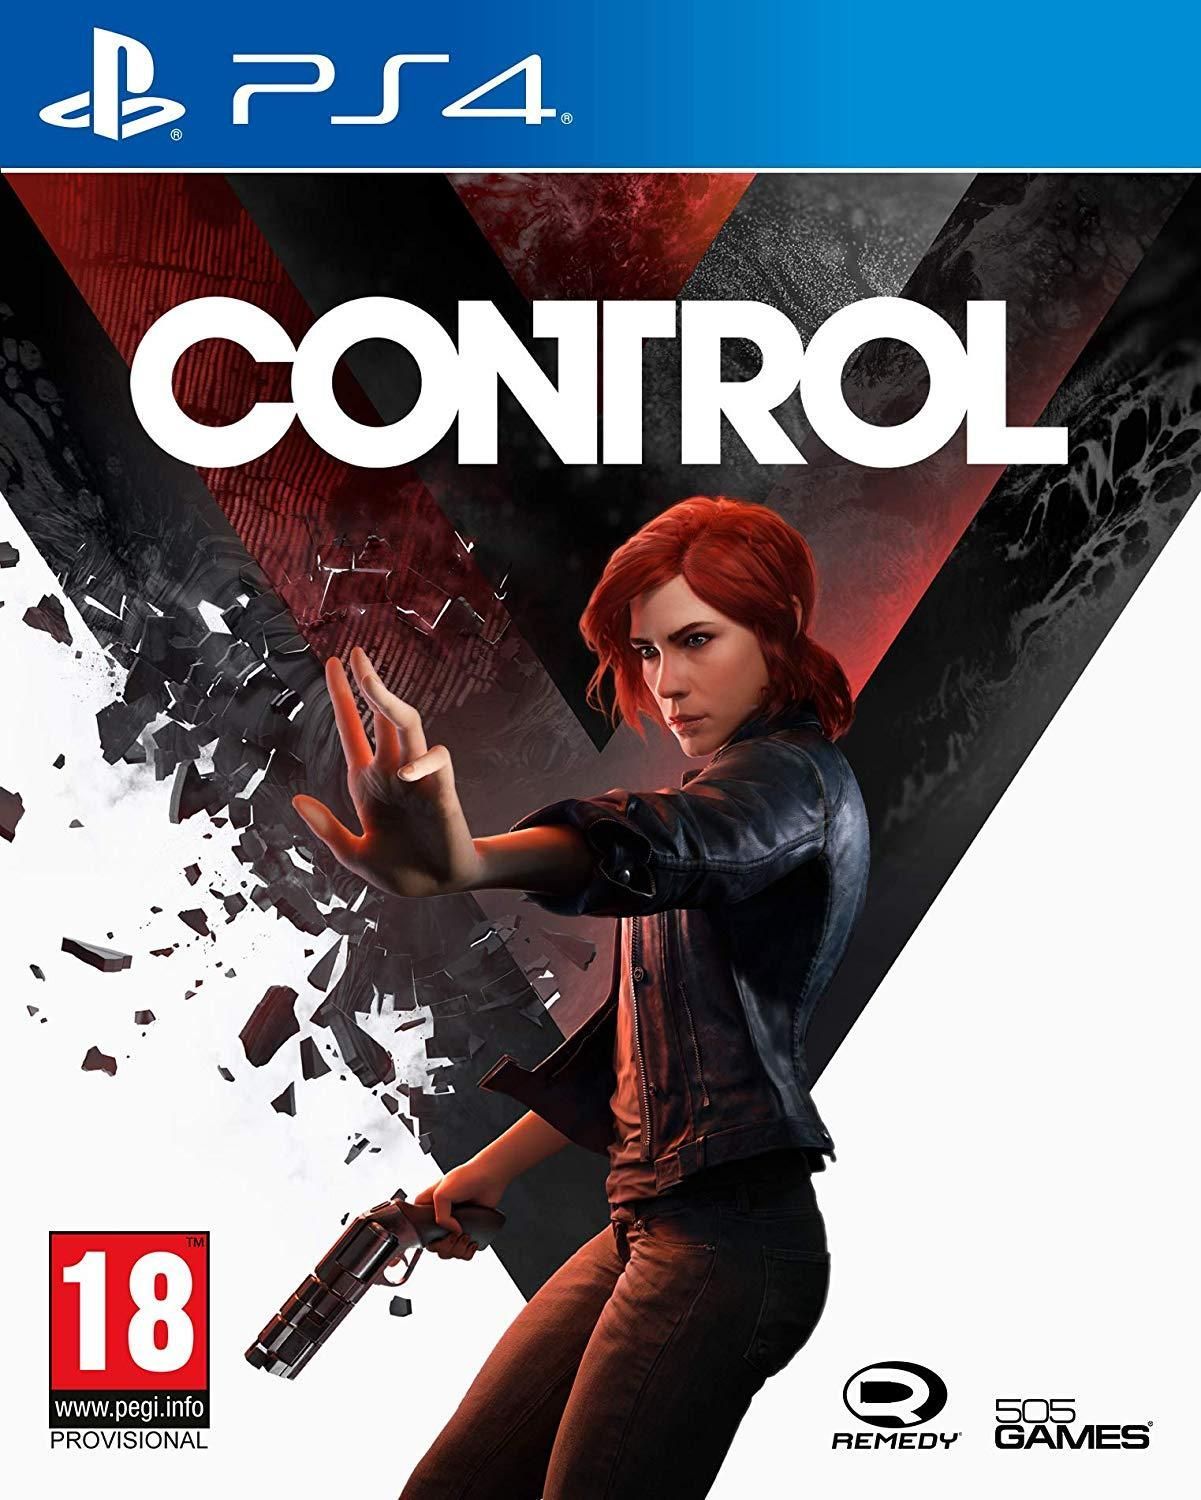 Control - Videojuego (PS4, PC, Xbox One, PS5 y Xbox Series X/S) - Vandal